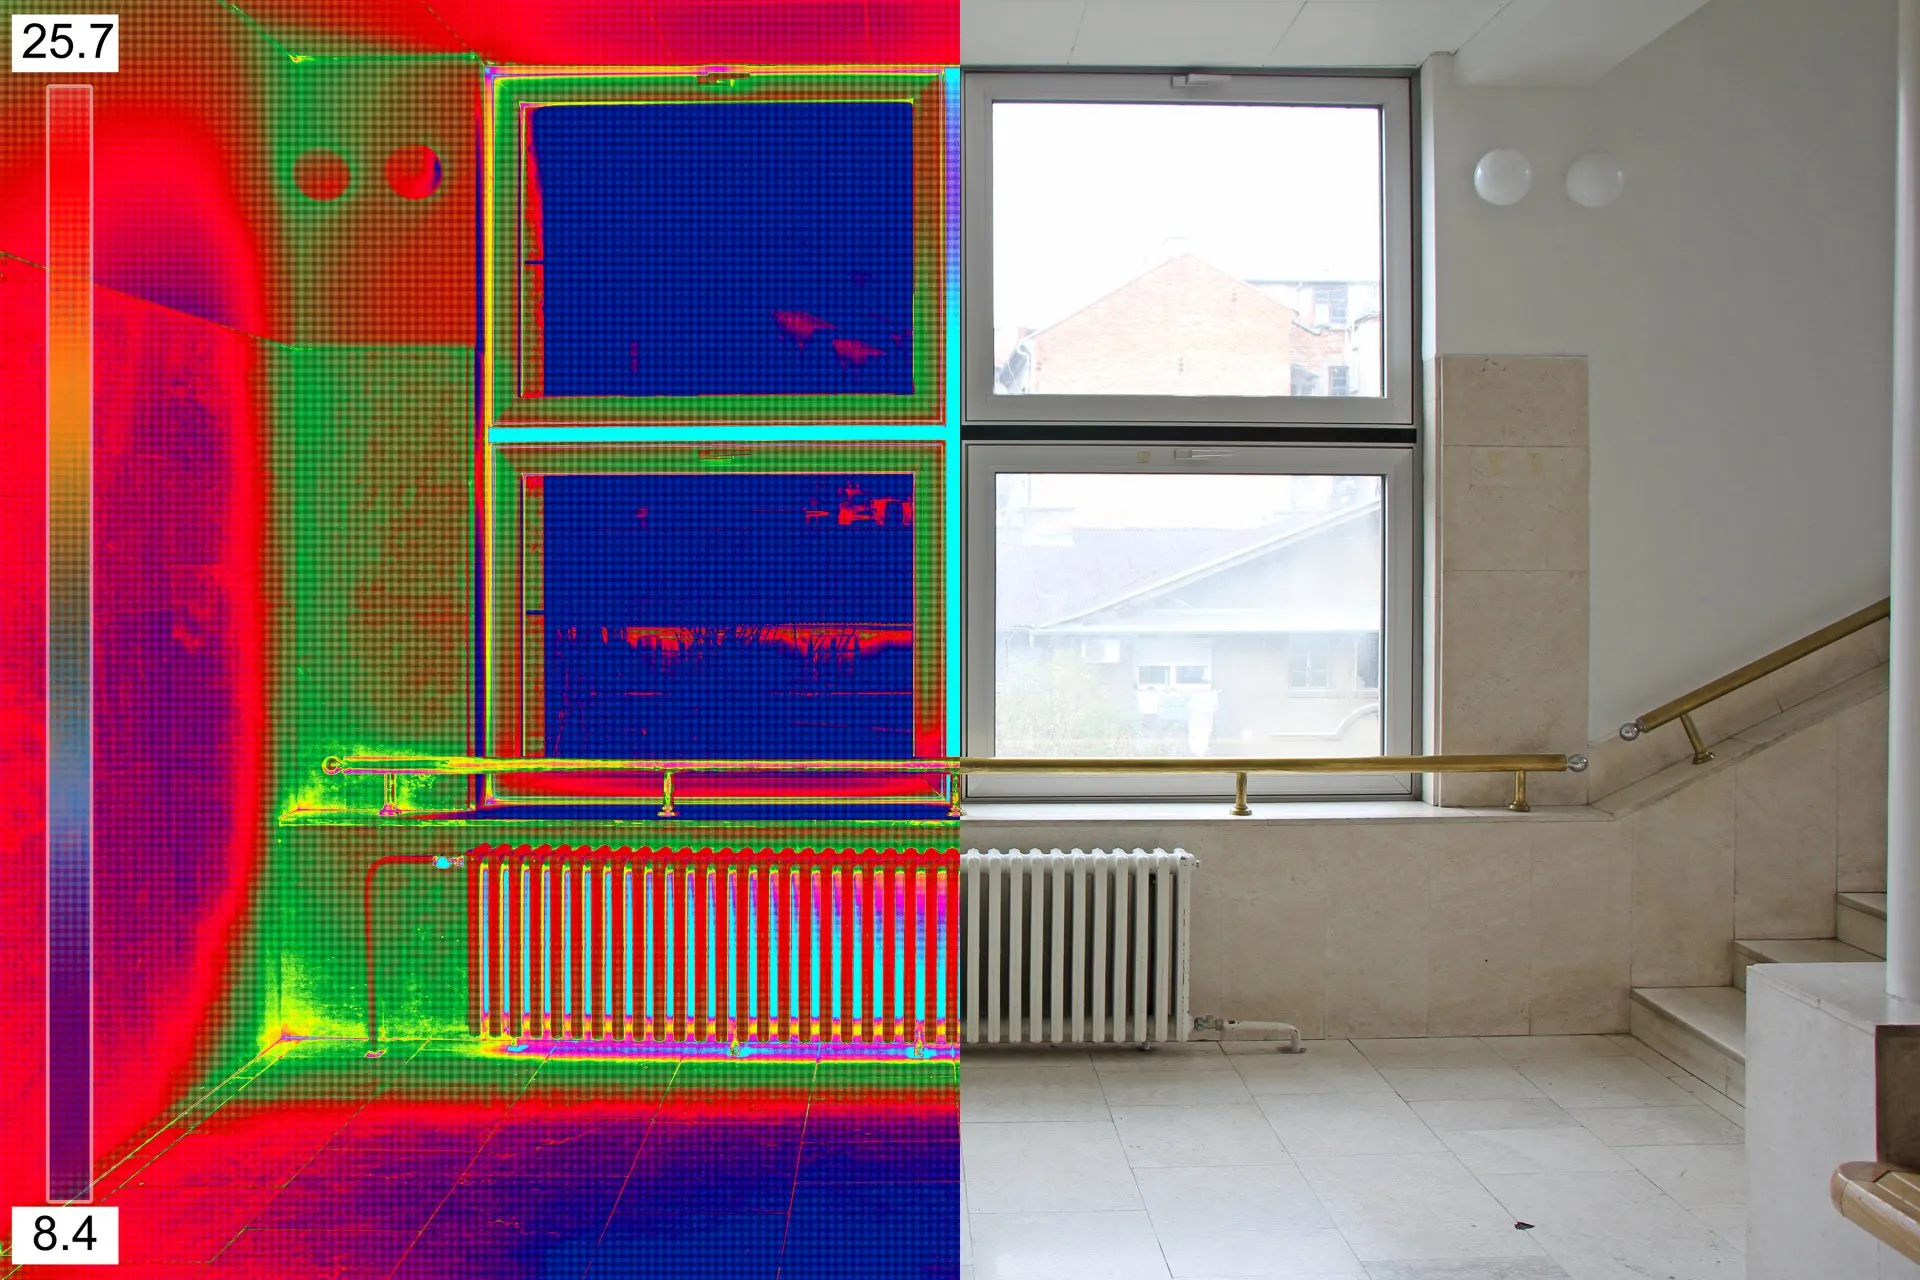 Graphic Thermal Windows